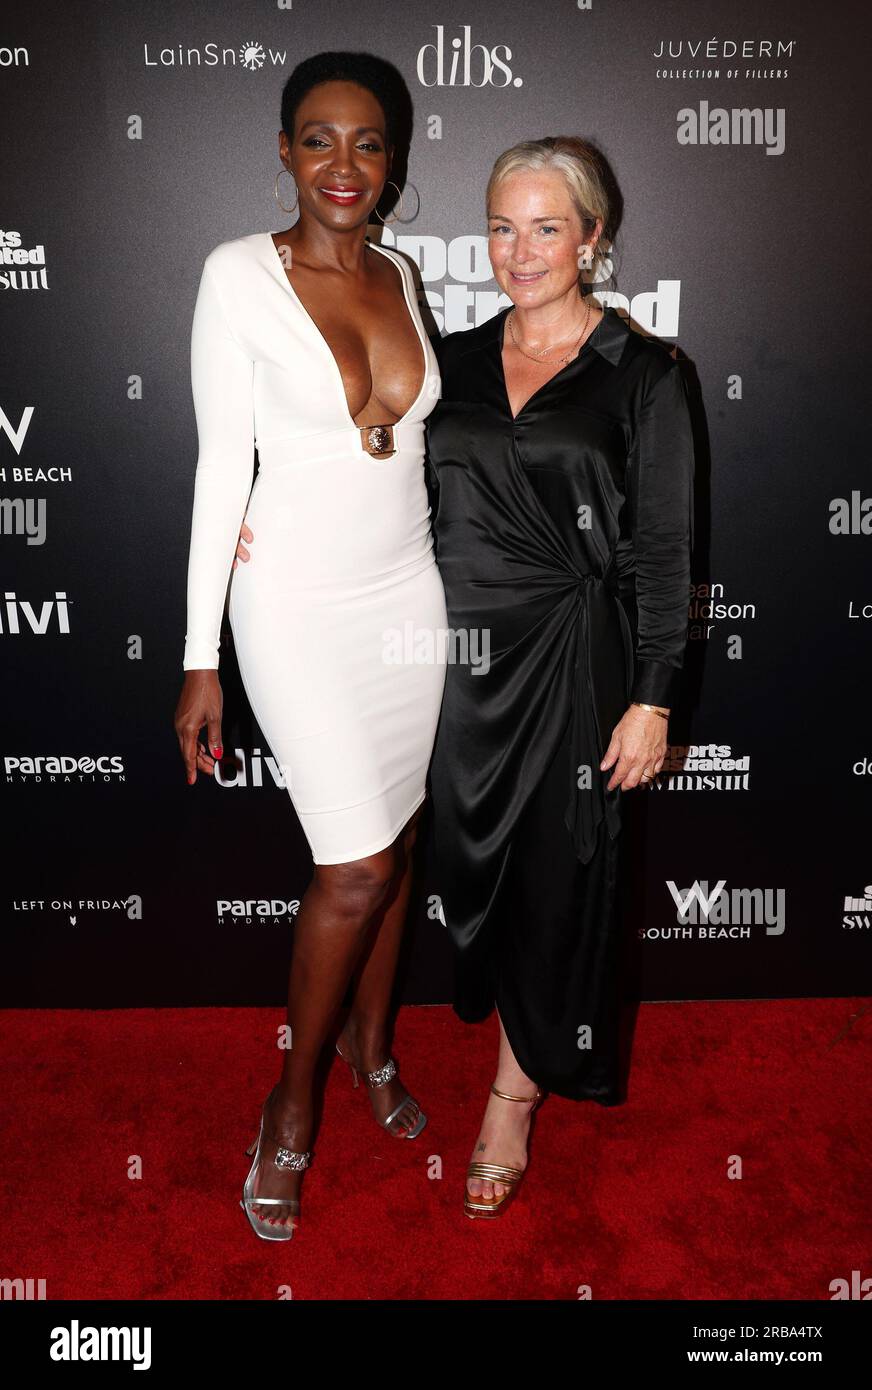 Miami, United States Of America. 07th July, 2023. MIAMI BEACH, FLORIDA - JULY 07: Roshumba and MJ Dayz arrive at Sports Illustrated Swimsuit Runway Show at W Hotel Miami Beach on July 07, 2023 in Miami Beach, Florida. (Photo by Alberto E. Tamargo/Sipa USA) Credit: Sipa USA/Alamy Live News Stock Photo